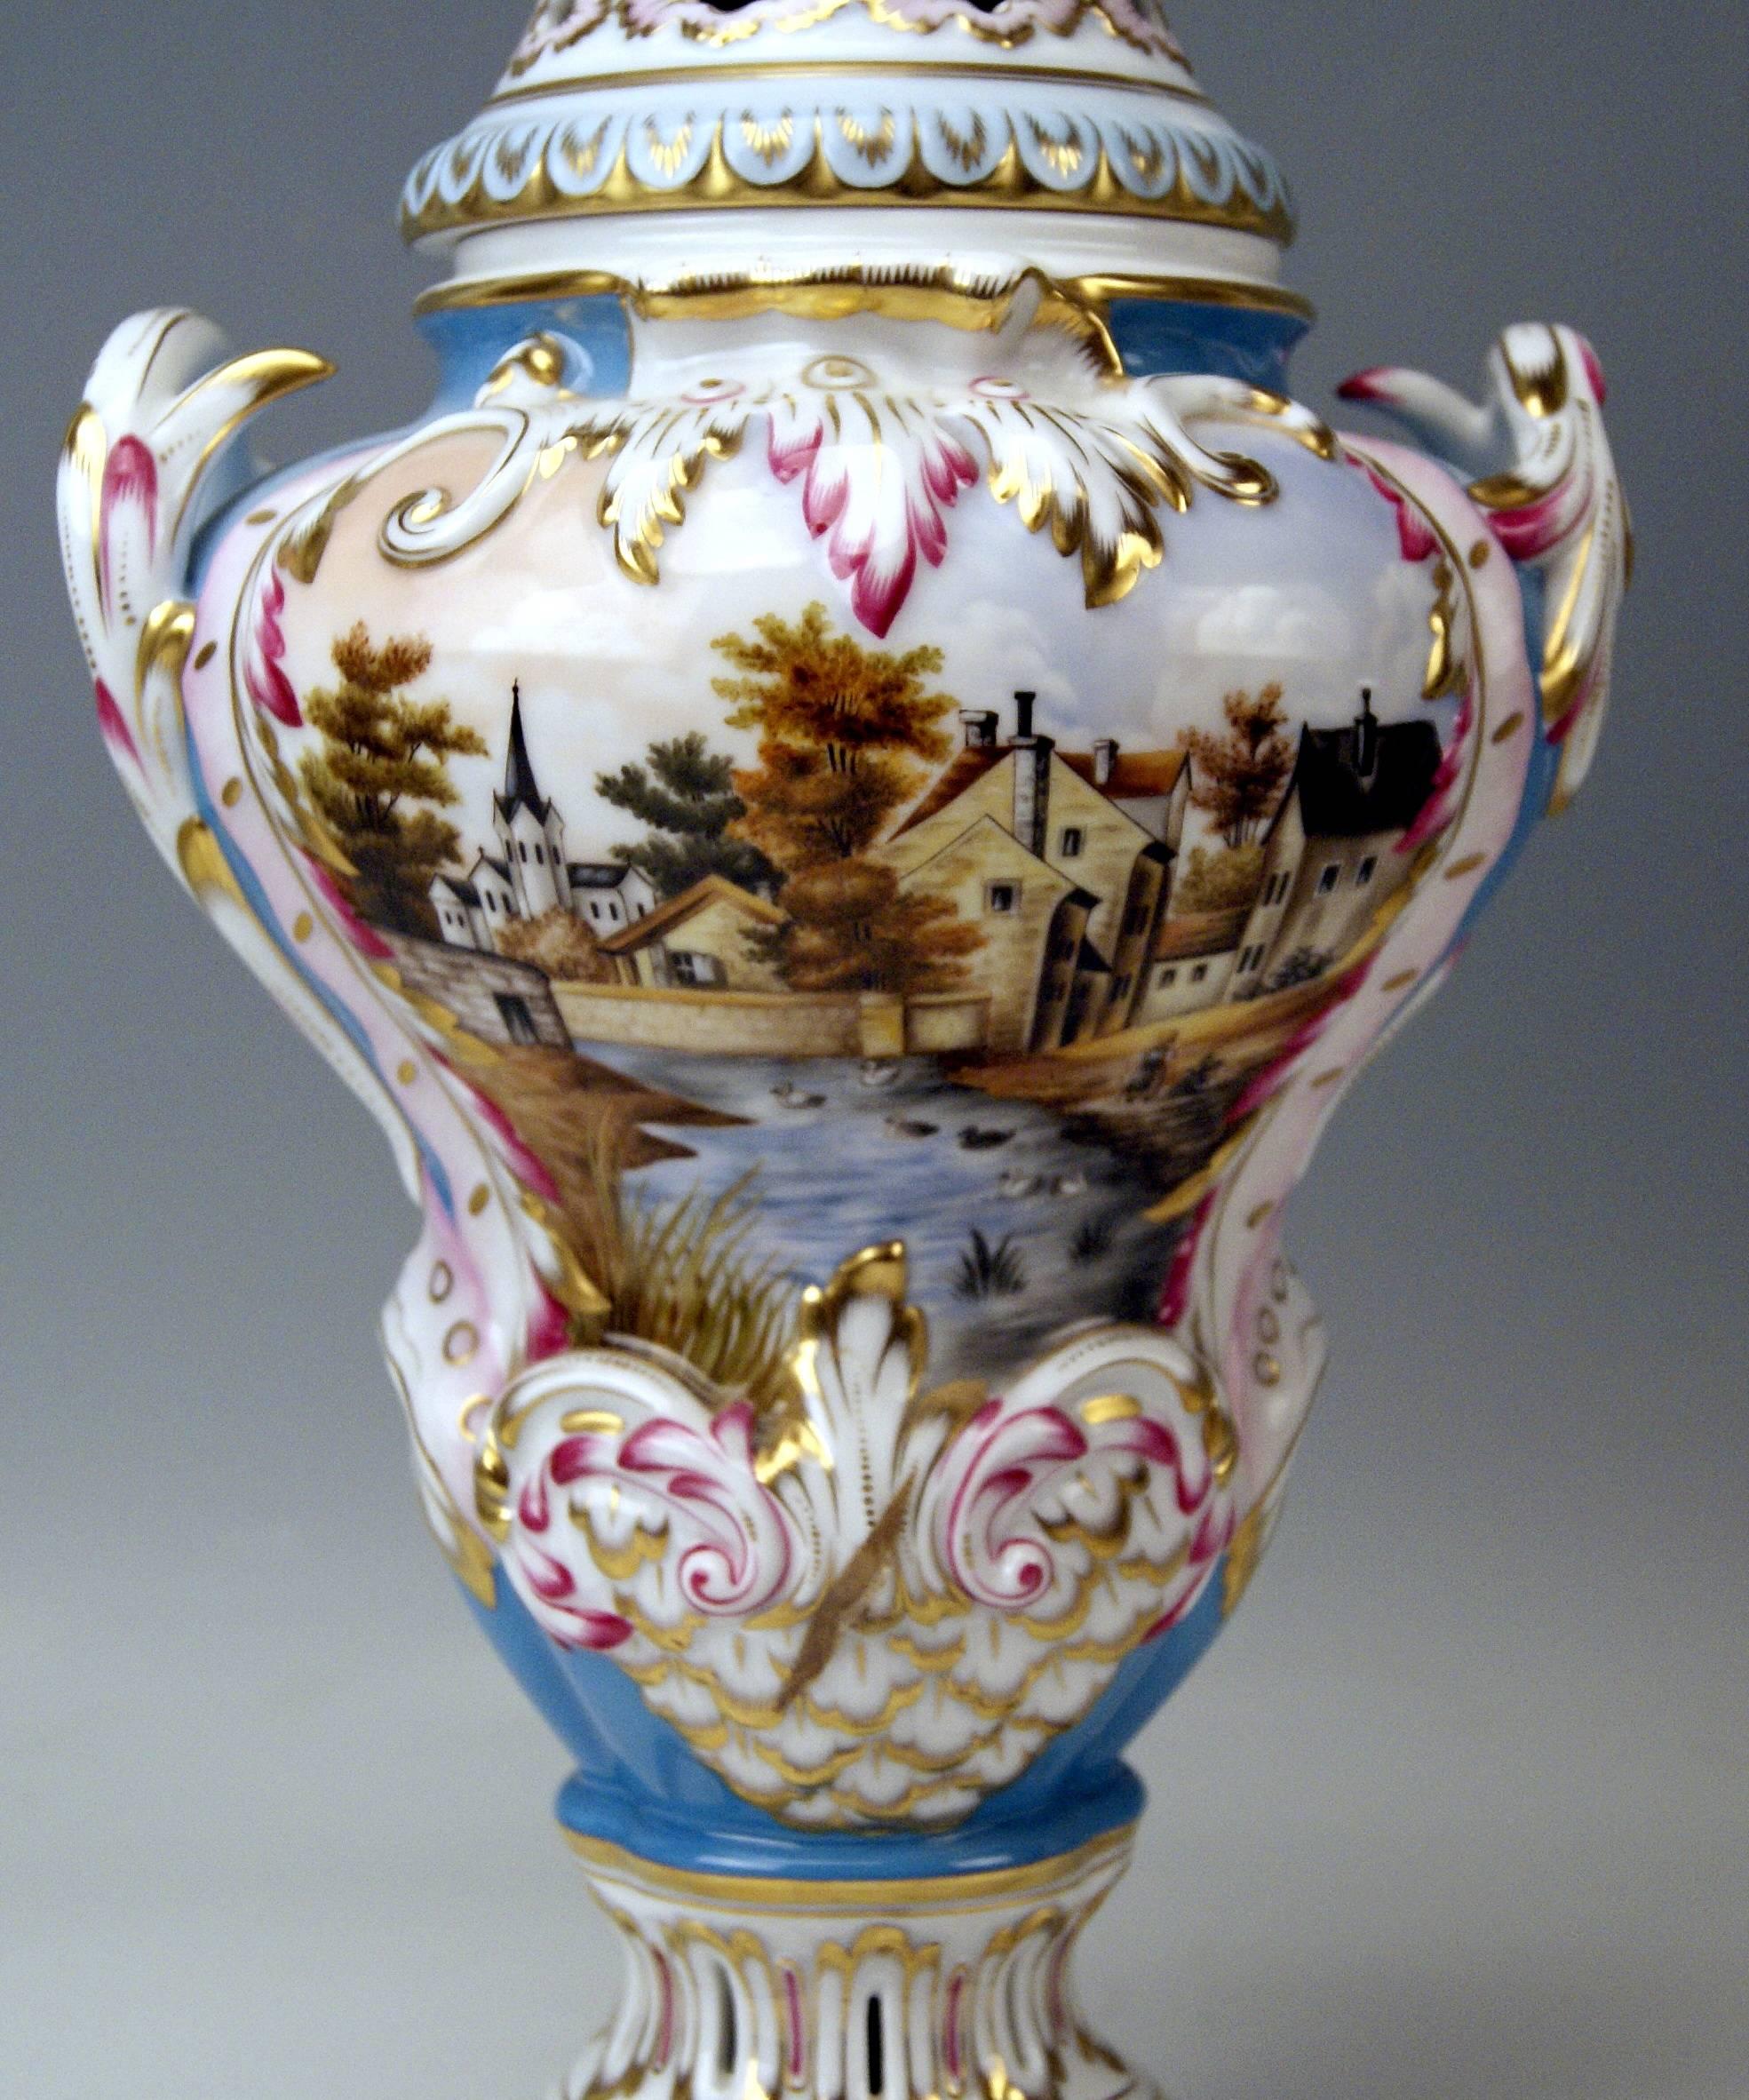 Glazed Herend Lidded Vase Picture Paintings by Istvan Lazar (1993), Height:14.76 inches